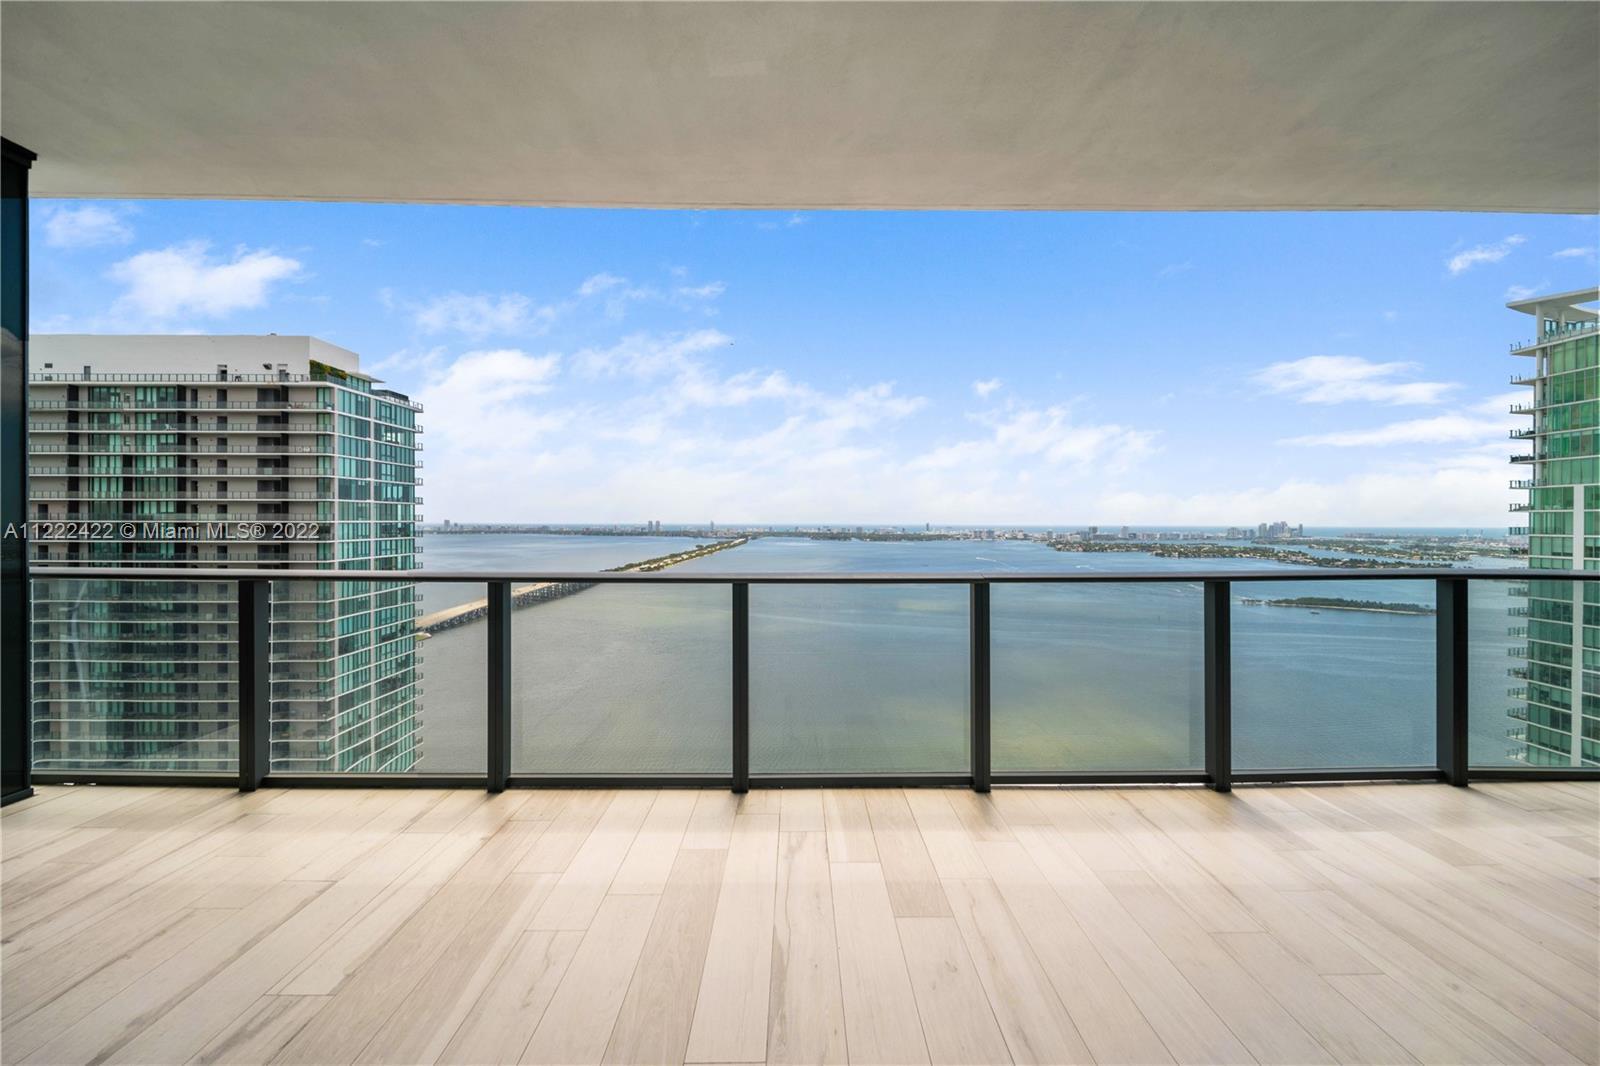 Spectacular 2bed 3bath plus den with amazing bay, ocean and Miami Beach views from large balcony. Be